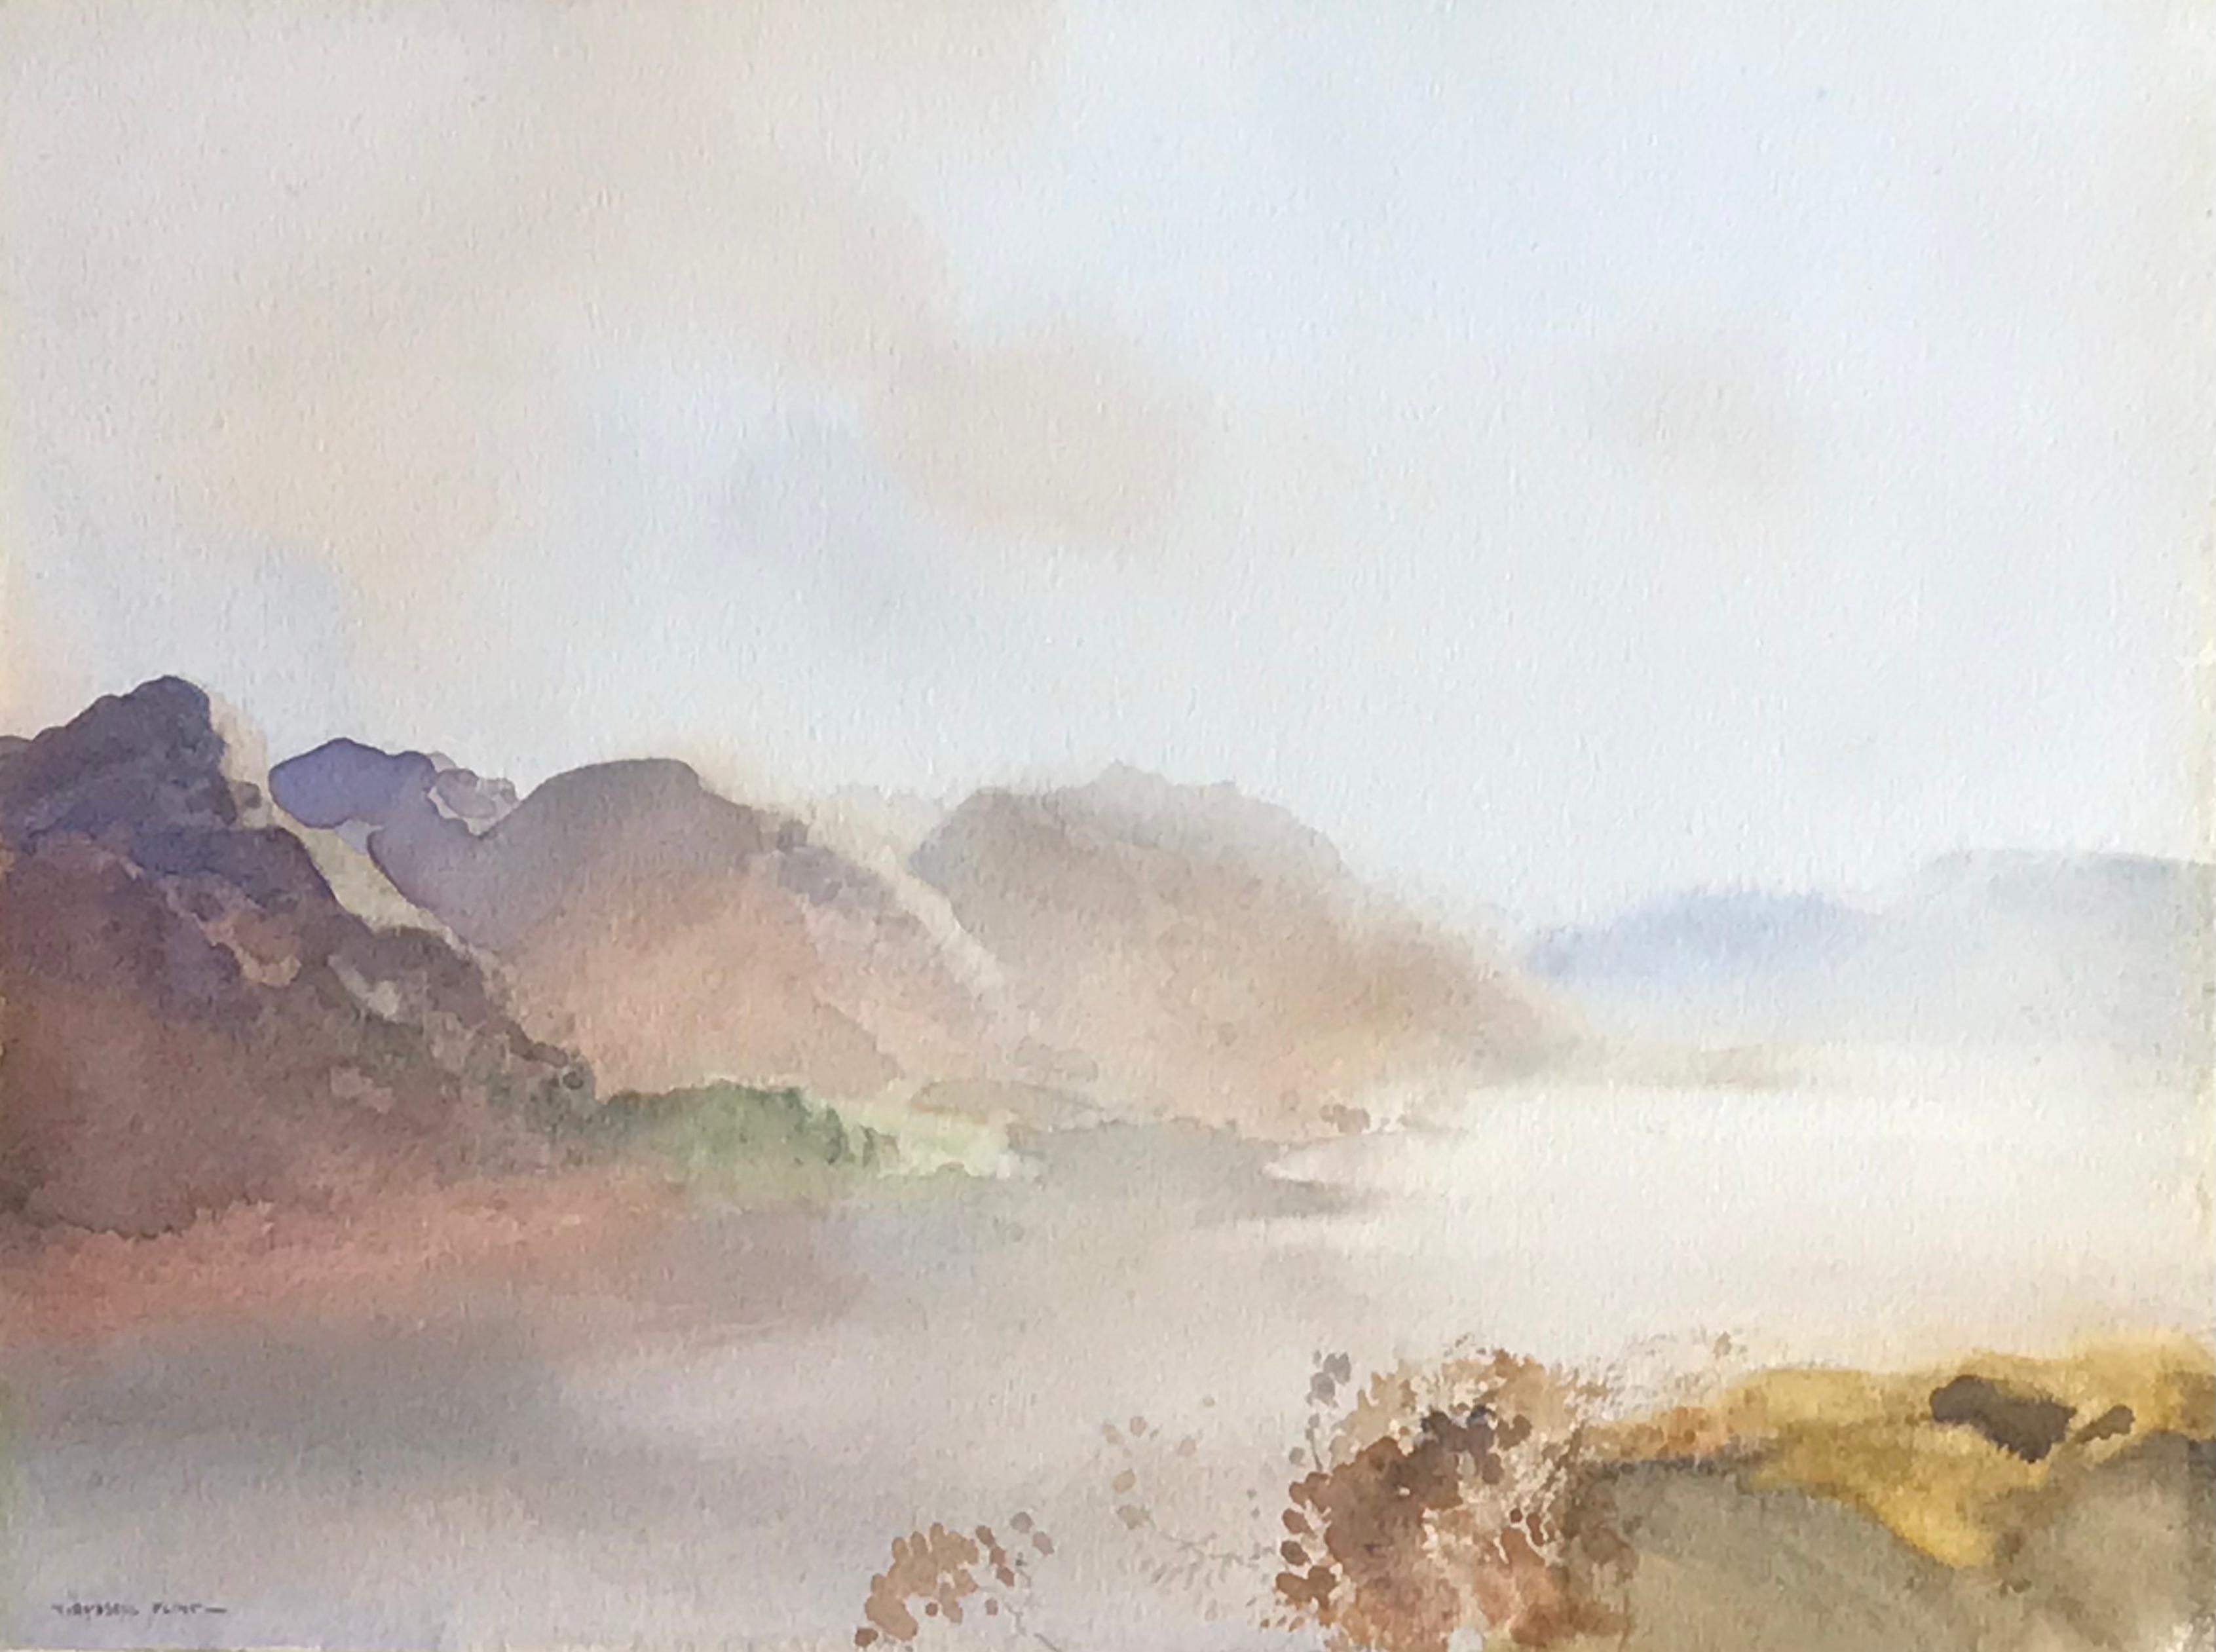 William Russell Flint Landscape Painting - "Landscape at Loch Earn, Scotland" Original Watercolour Painting